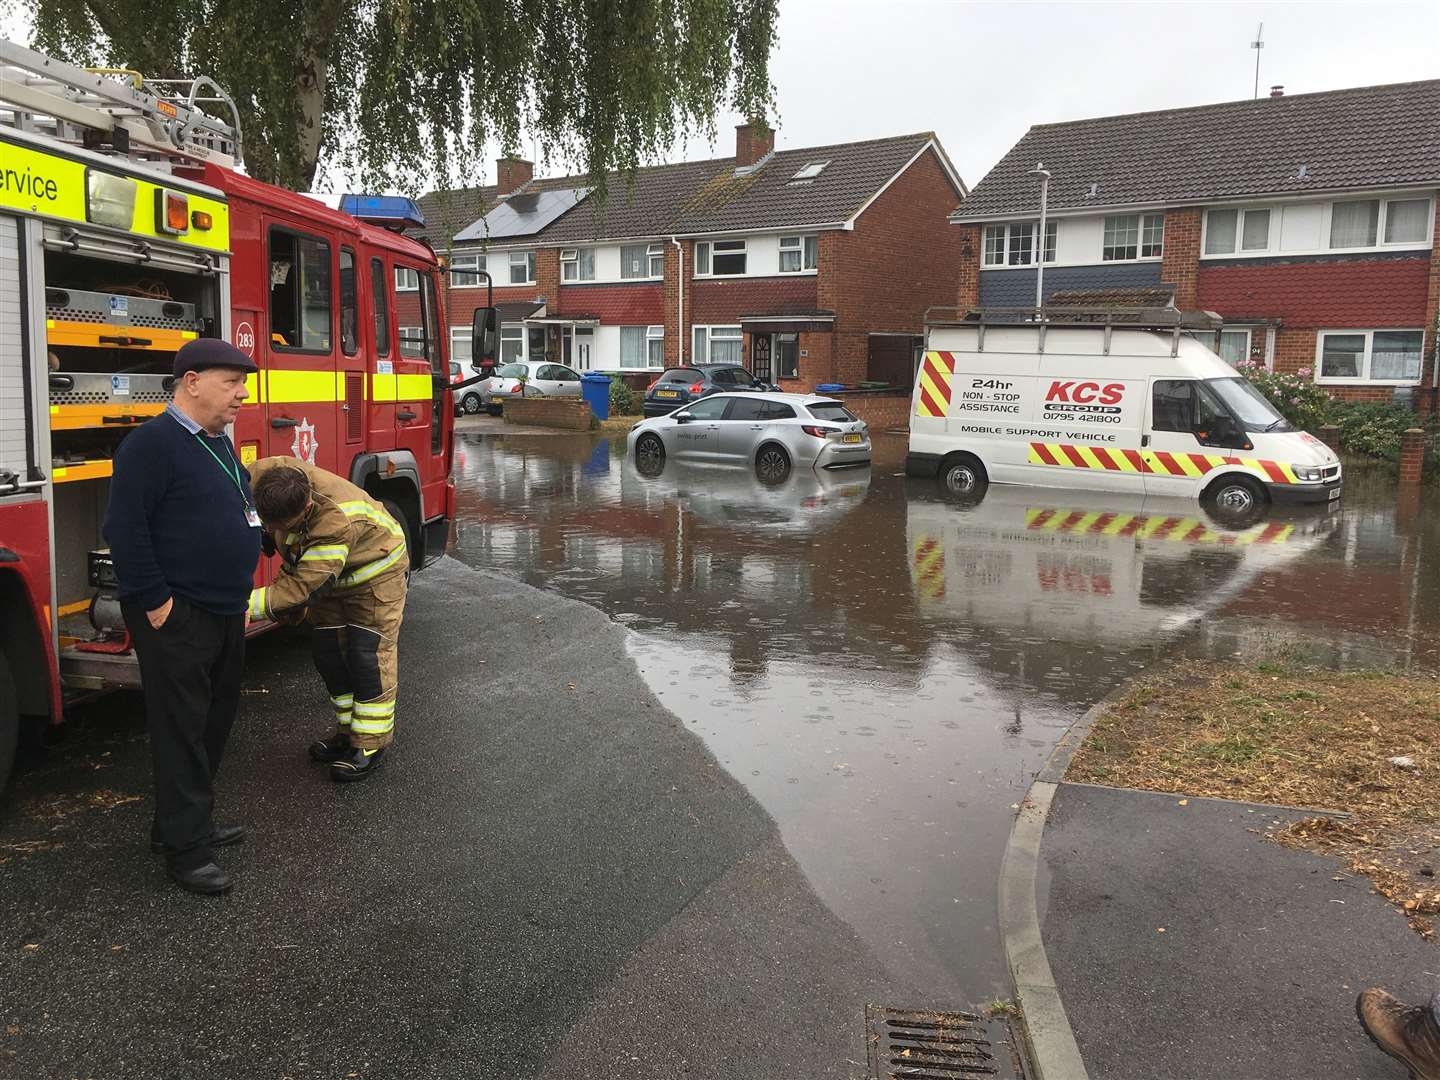 Flash flooding in Sittingbourne prompted an emergency operation by firefighters in Coombe Drive Murston